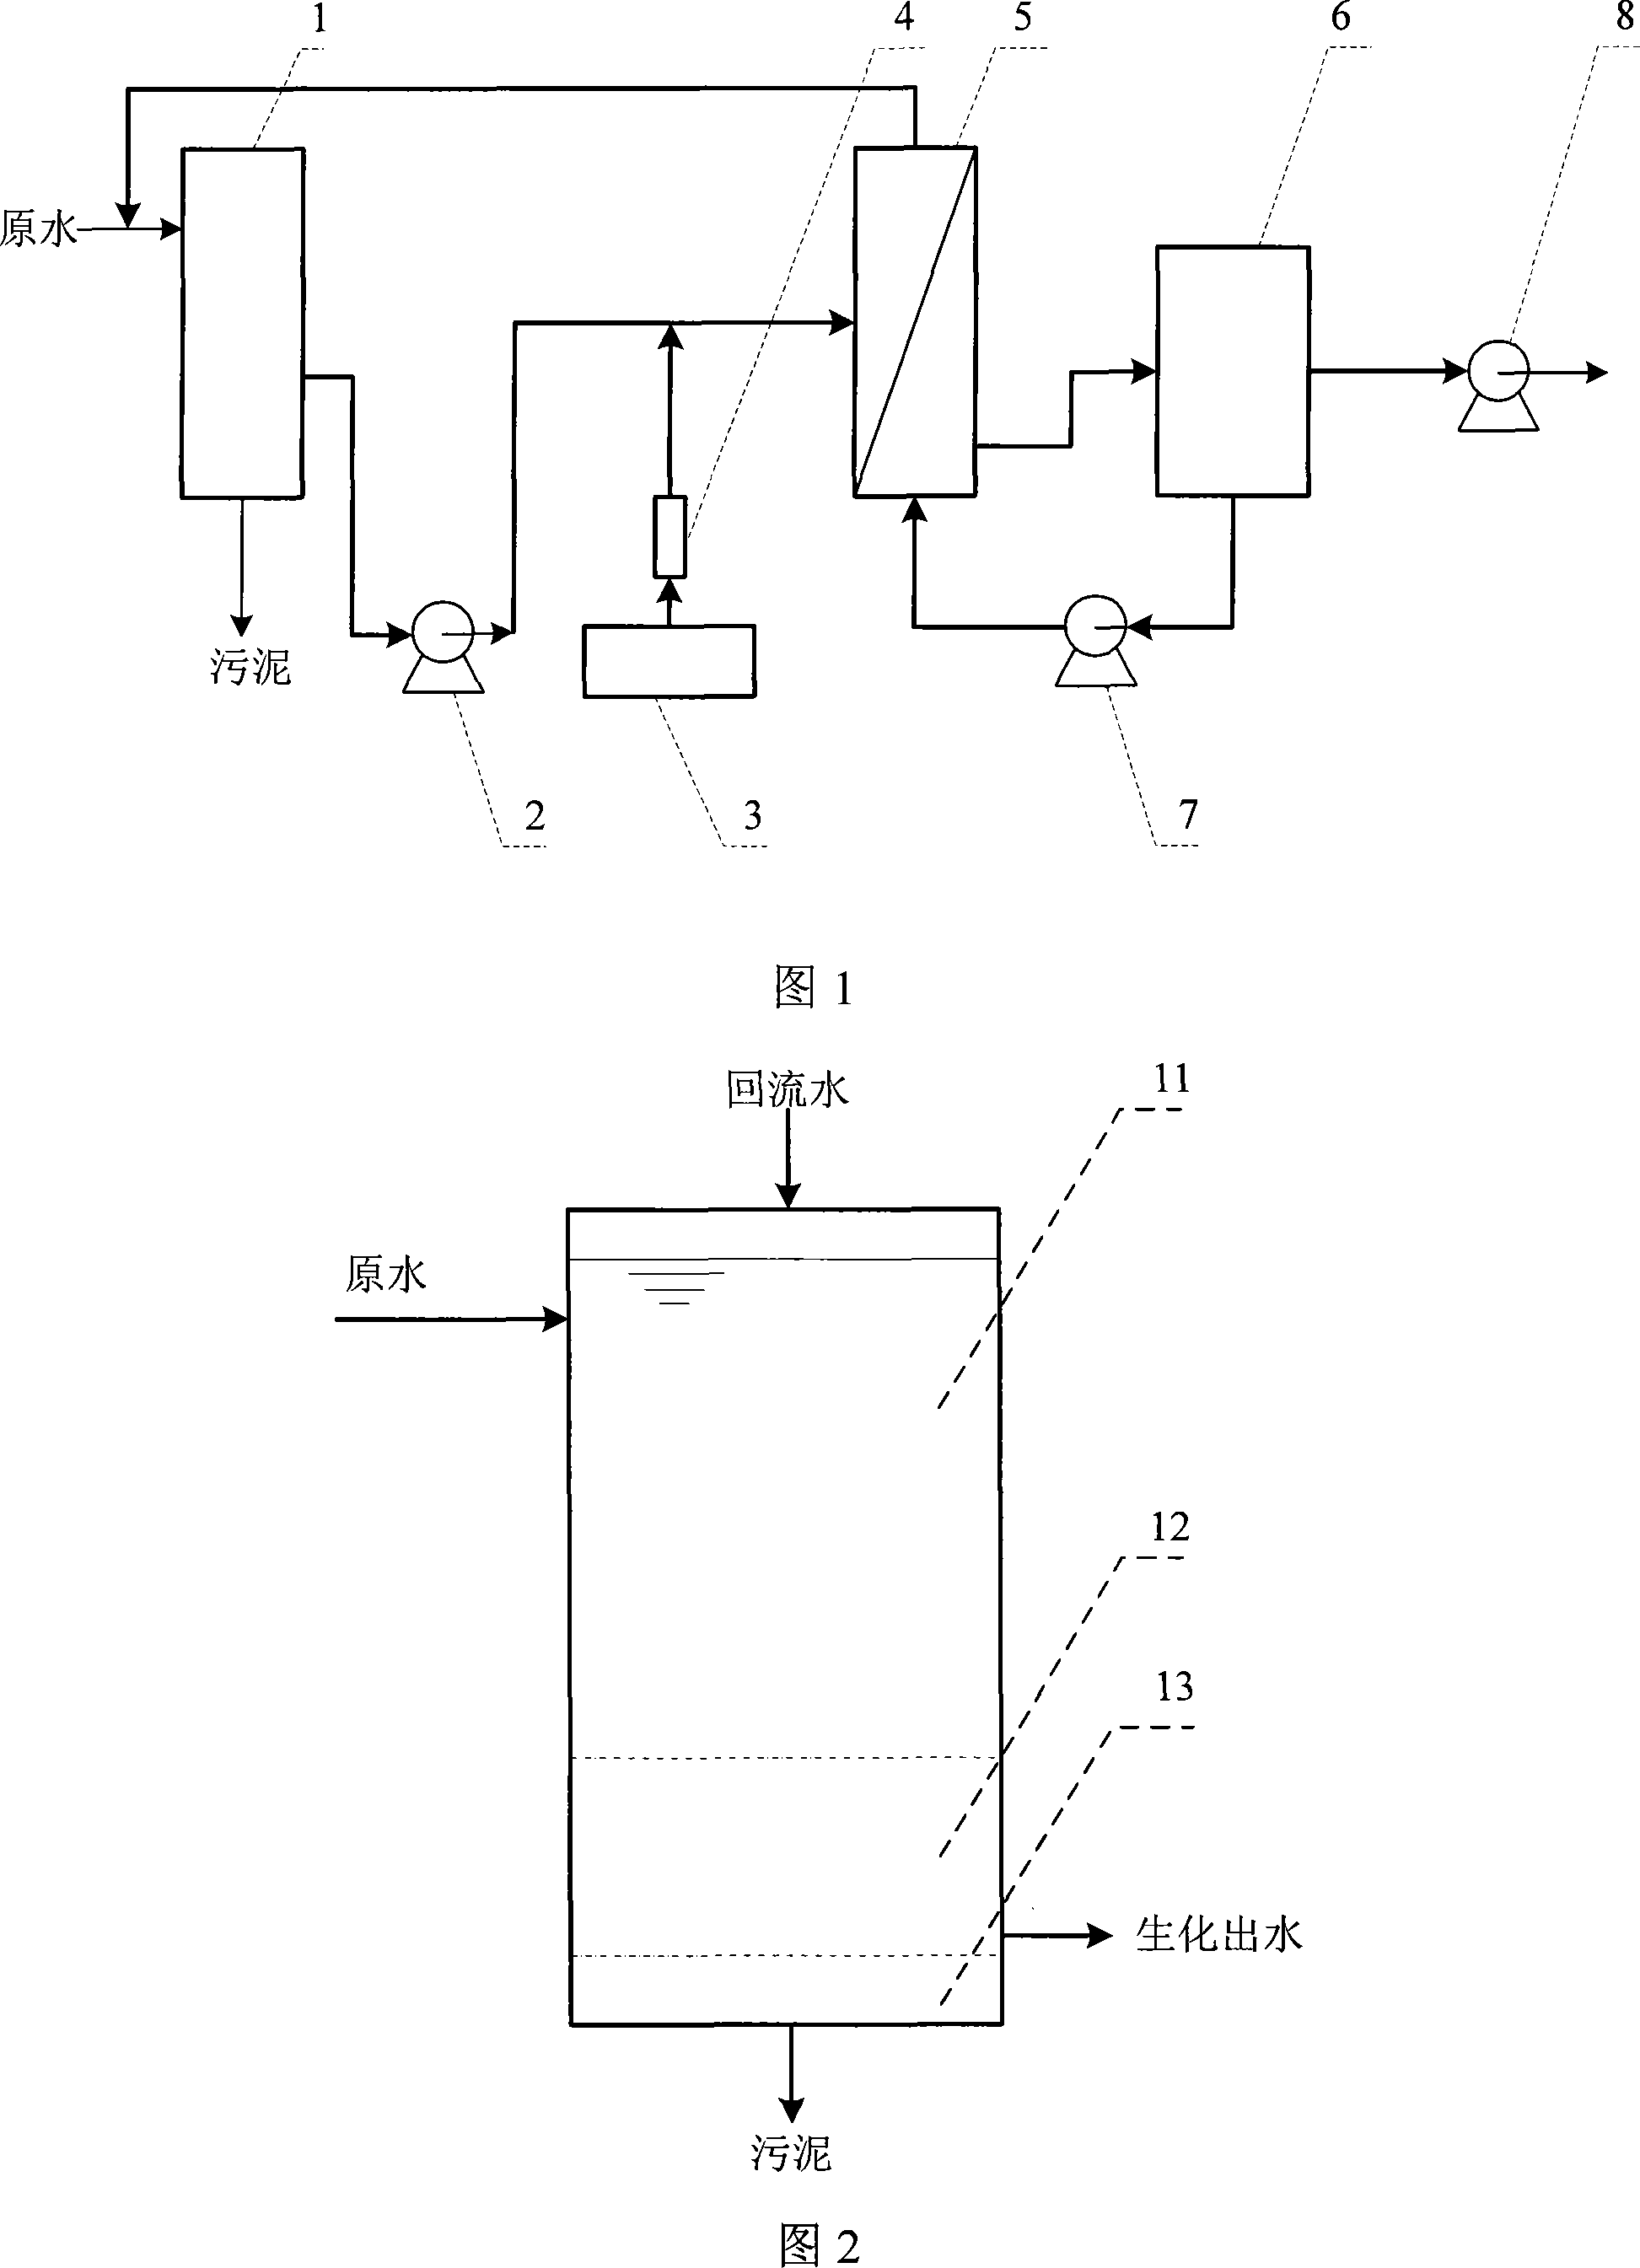 Membrane bioreactor and use thereof in wastewater treatment